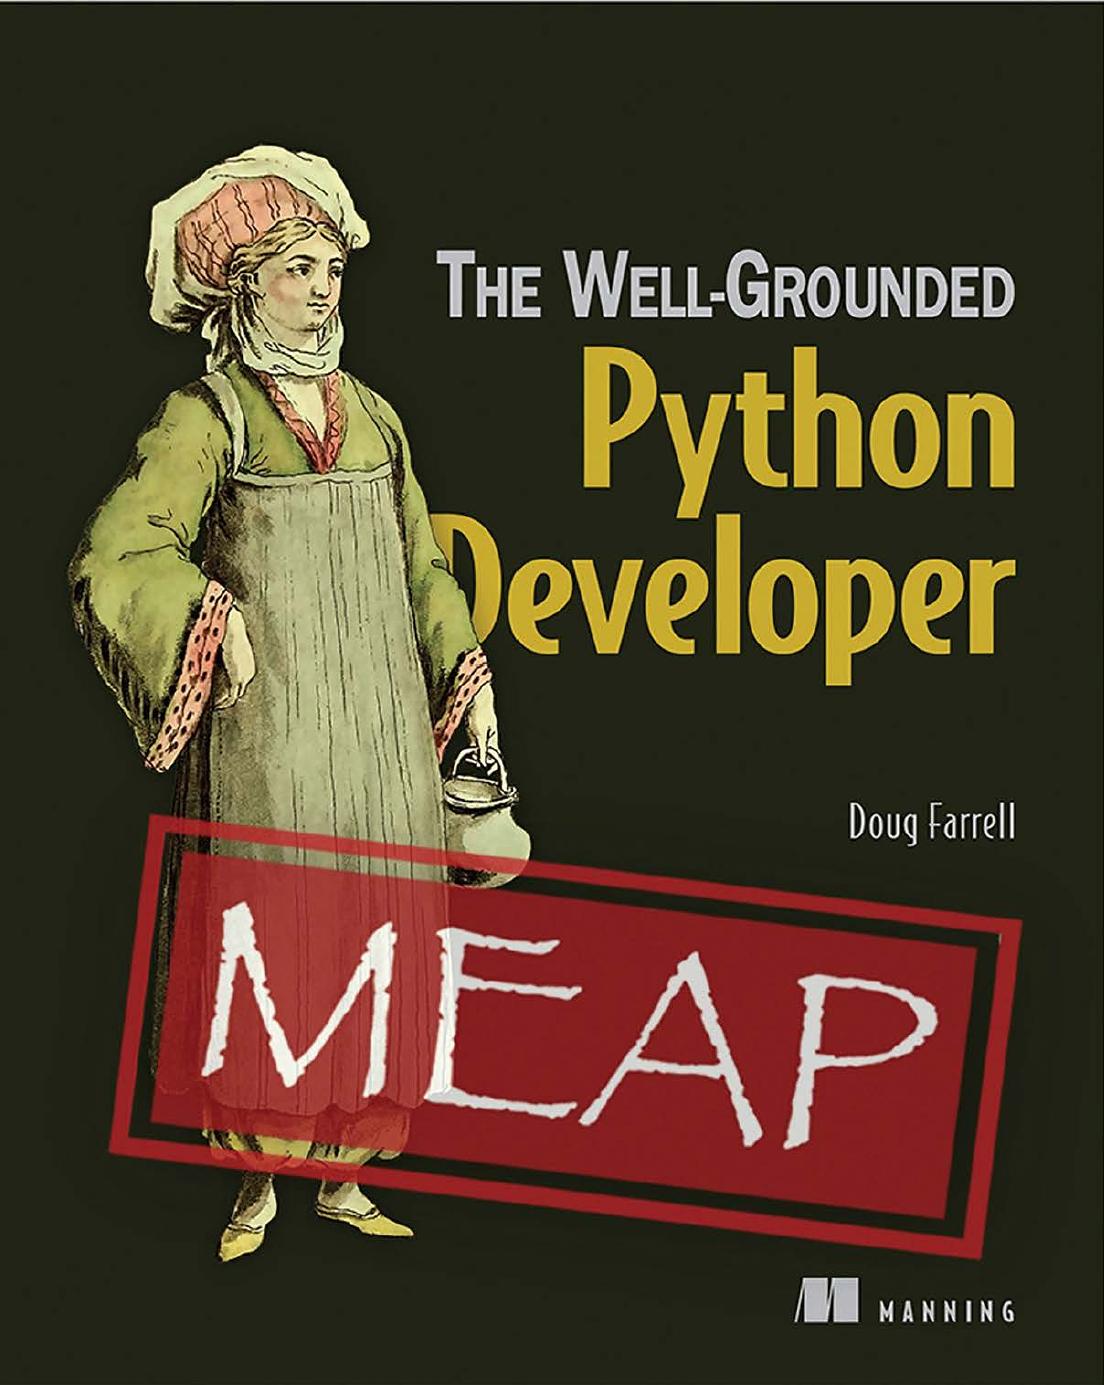 The Well-Grounded Python Developer Version 8 by Doug Farrell